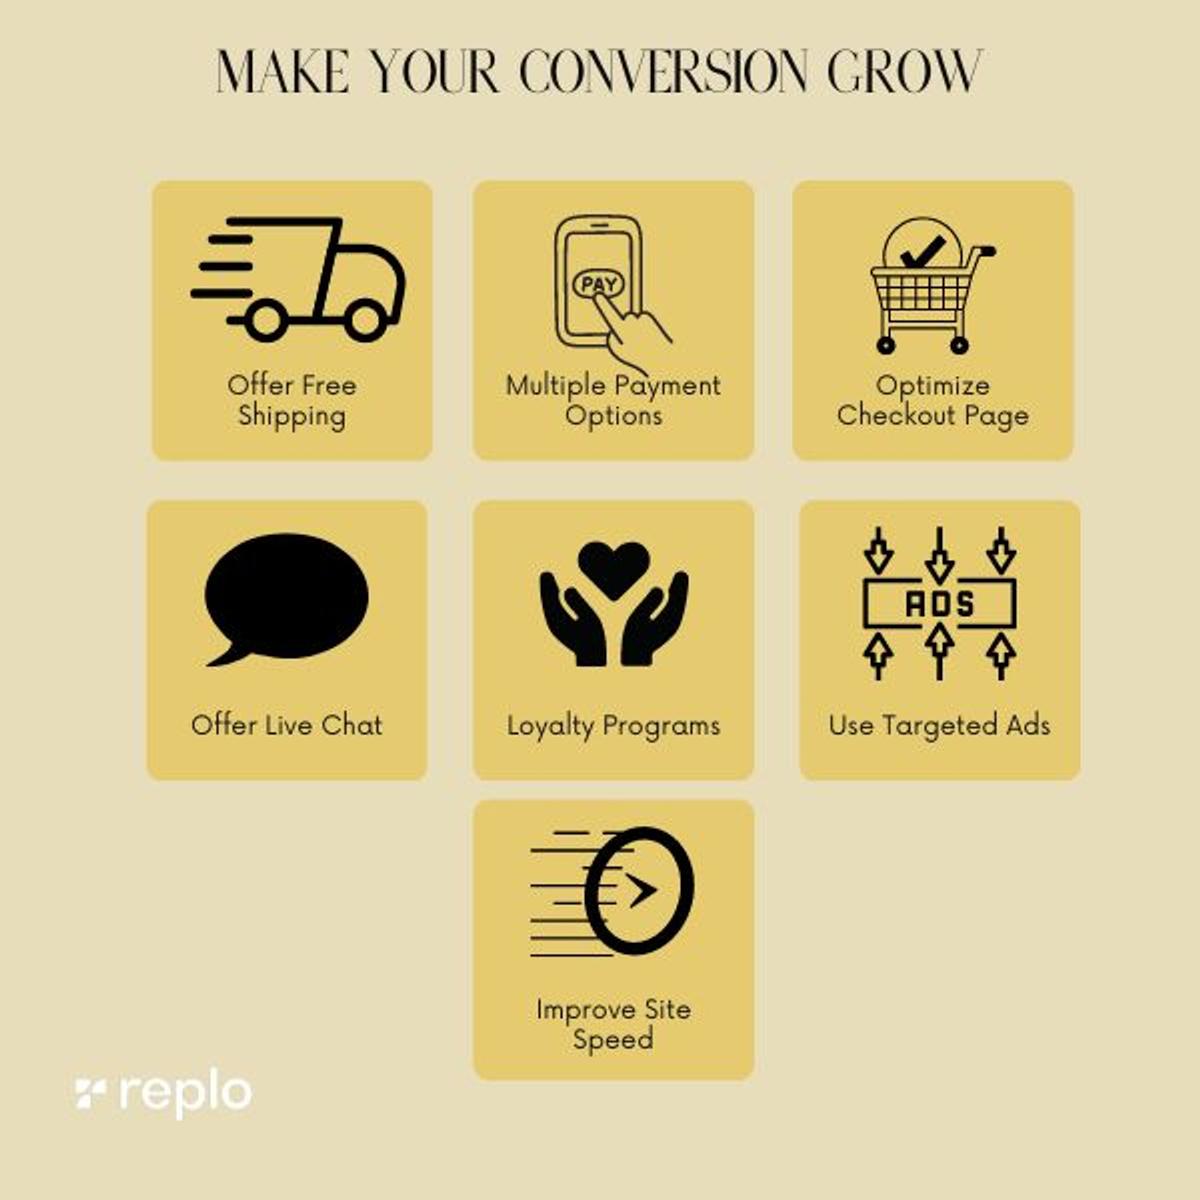  Tips for growing site conversion rates